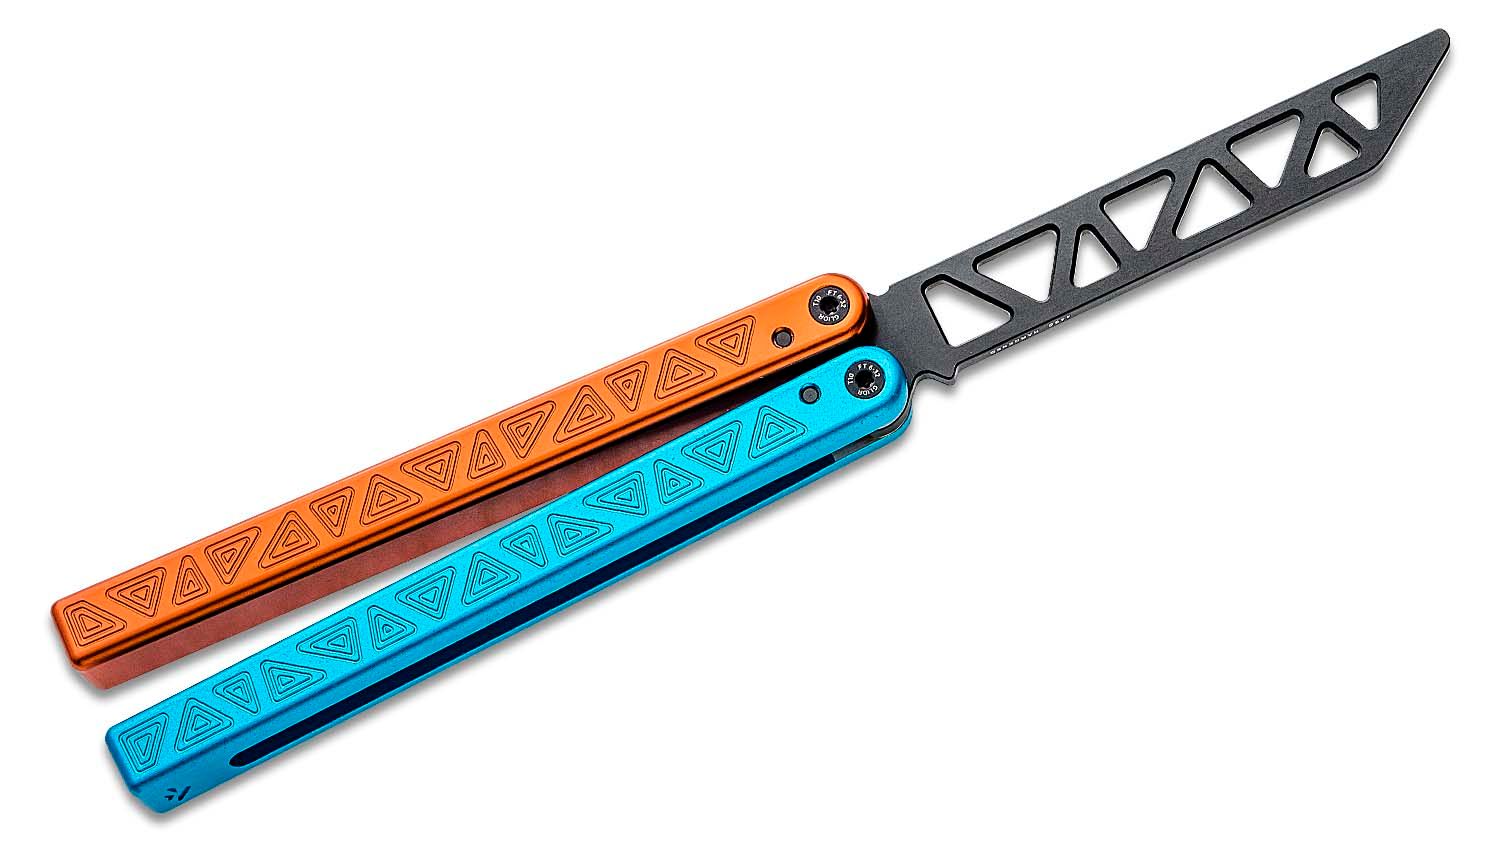 Glidr Original 4 Fire & Ice Balisong Butterfly Trainer 4.8 